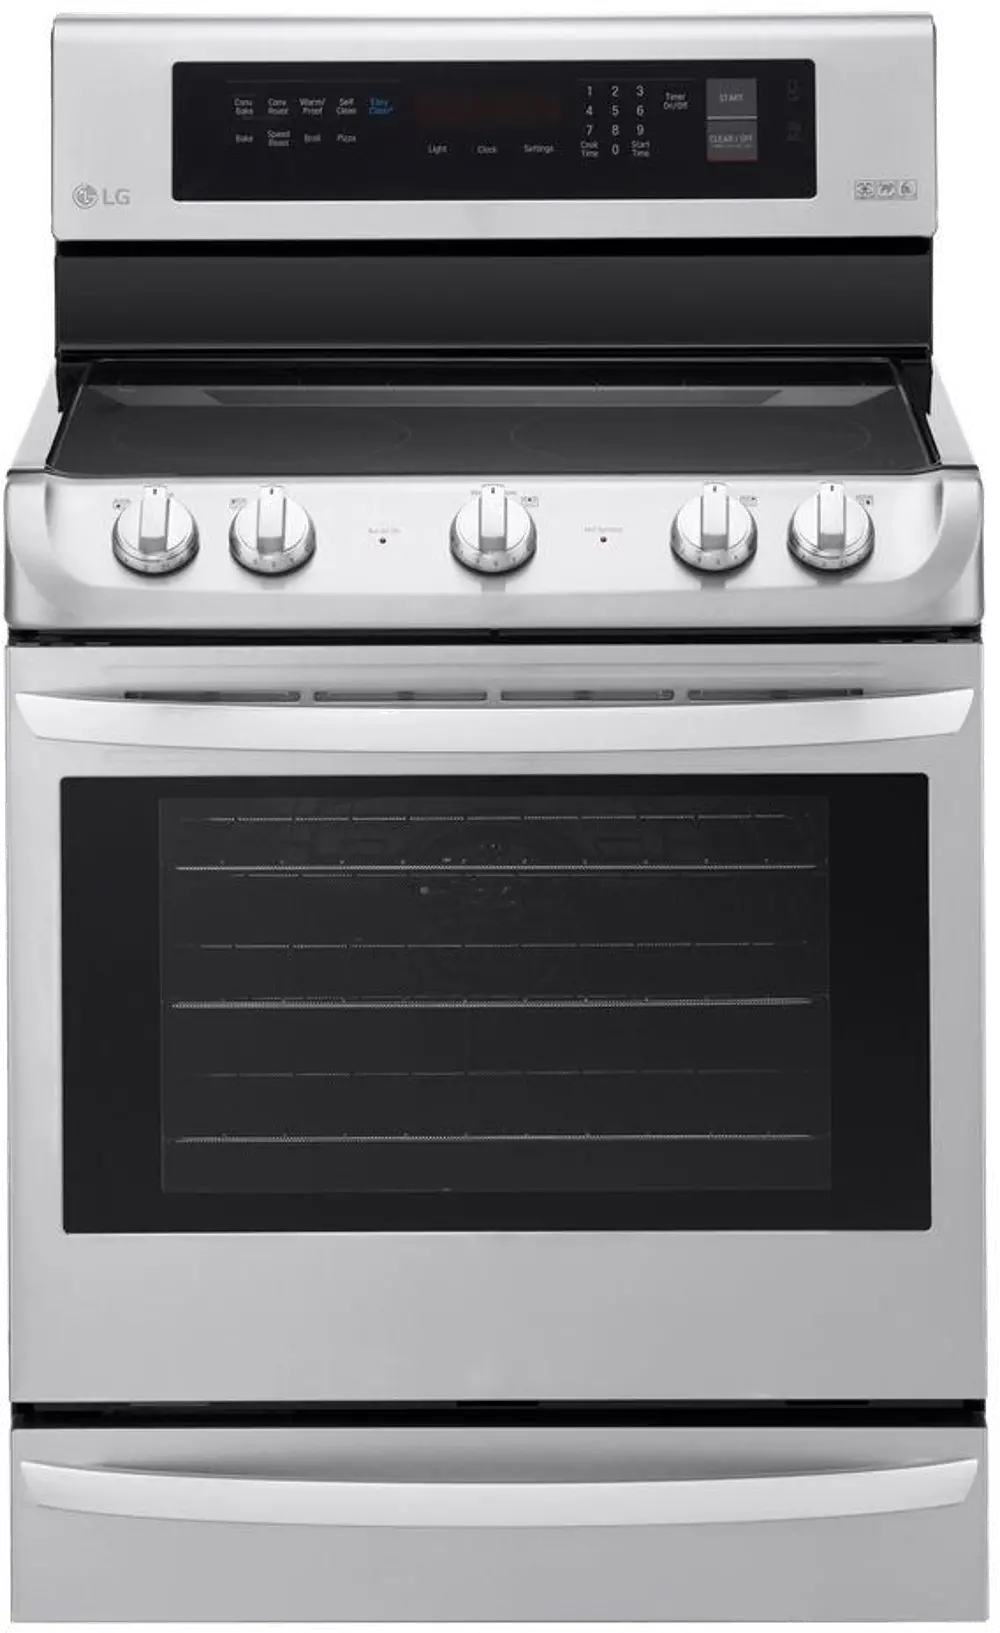 LRE4213ST LG Electric Range - 6.3 cu. ft Stainless Steel-1